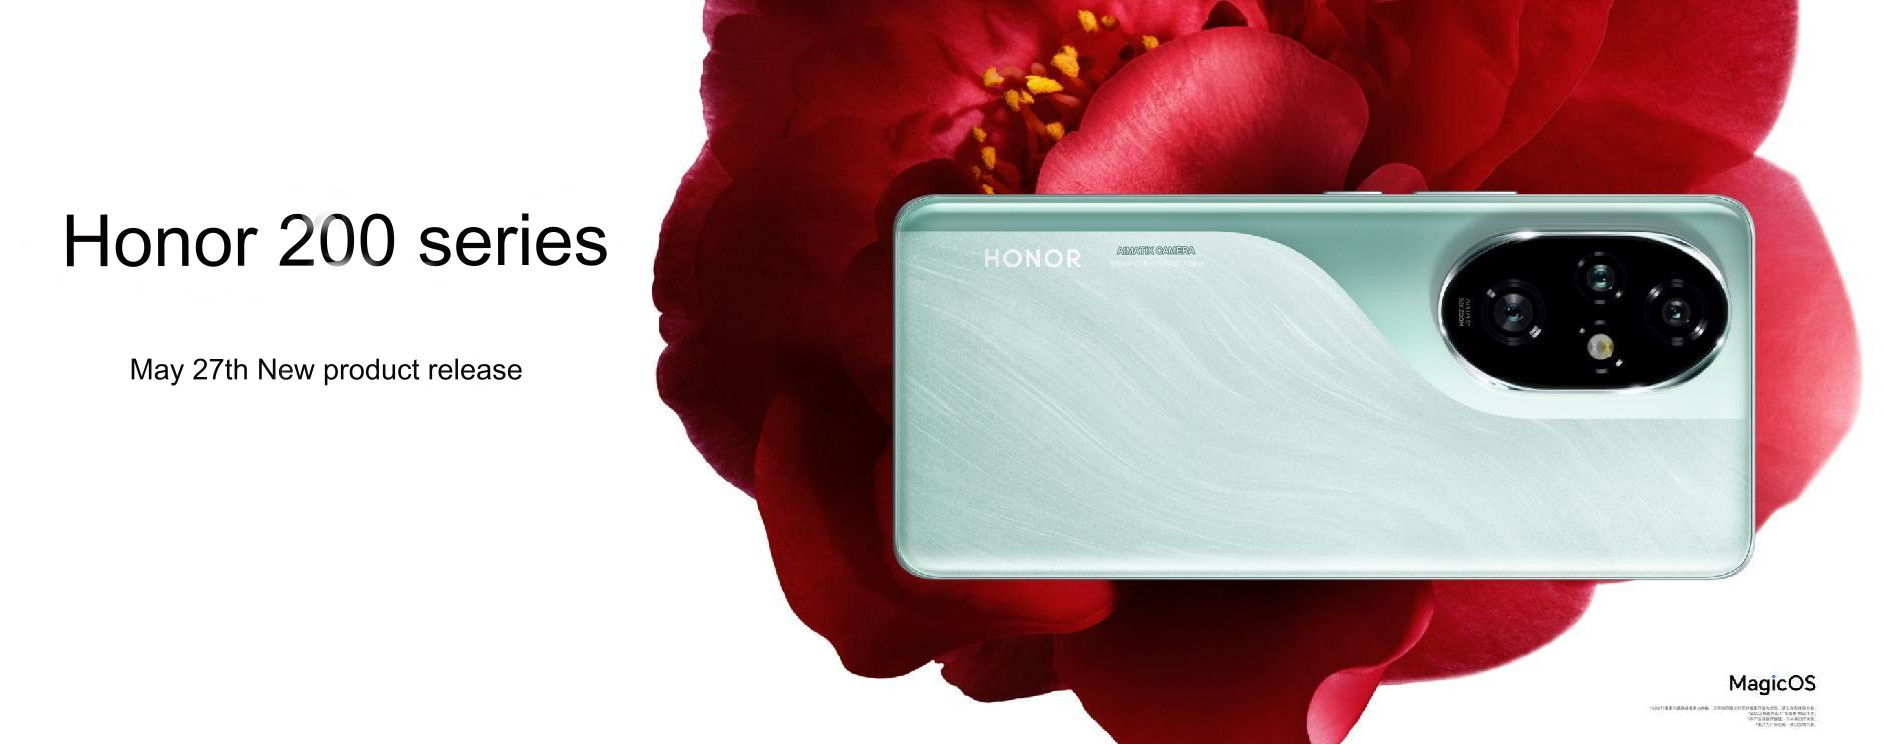 HONOR 200 series to be announced on May 27th